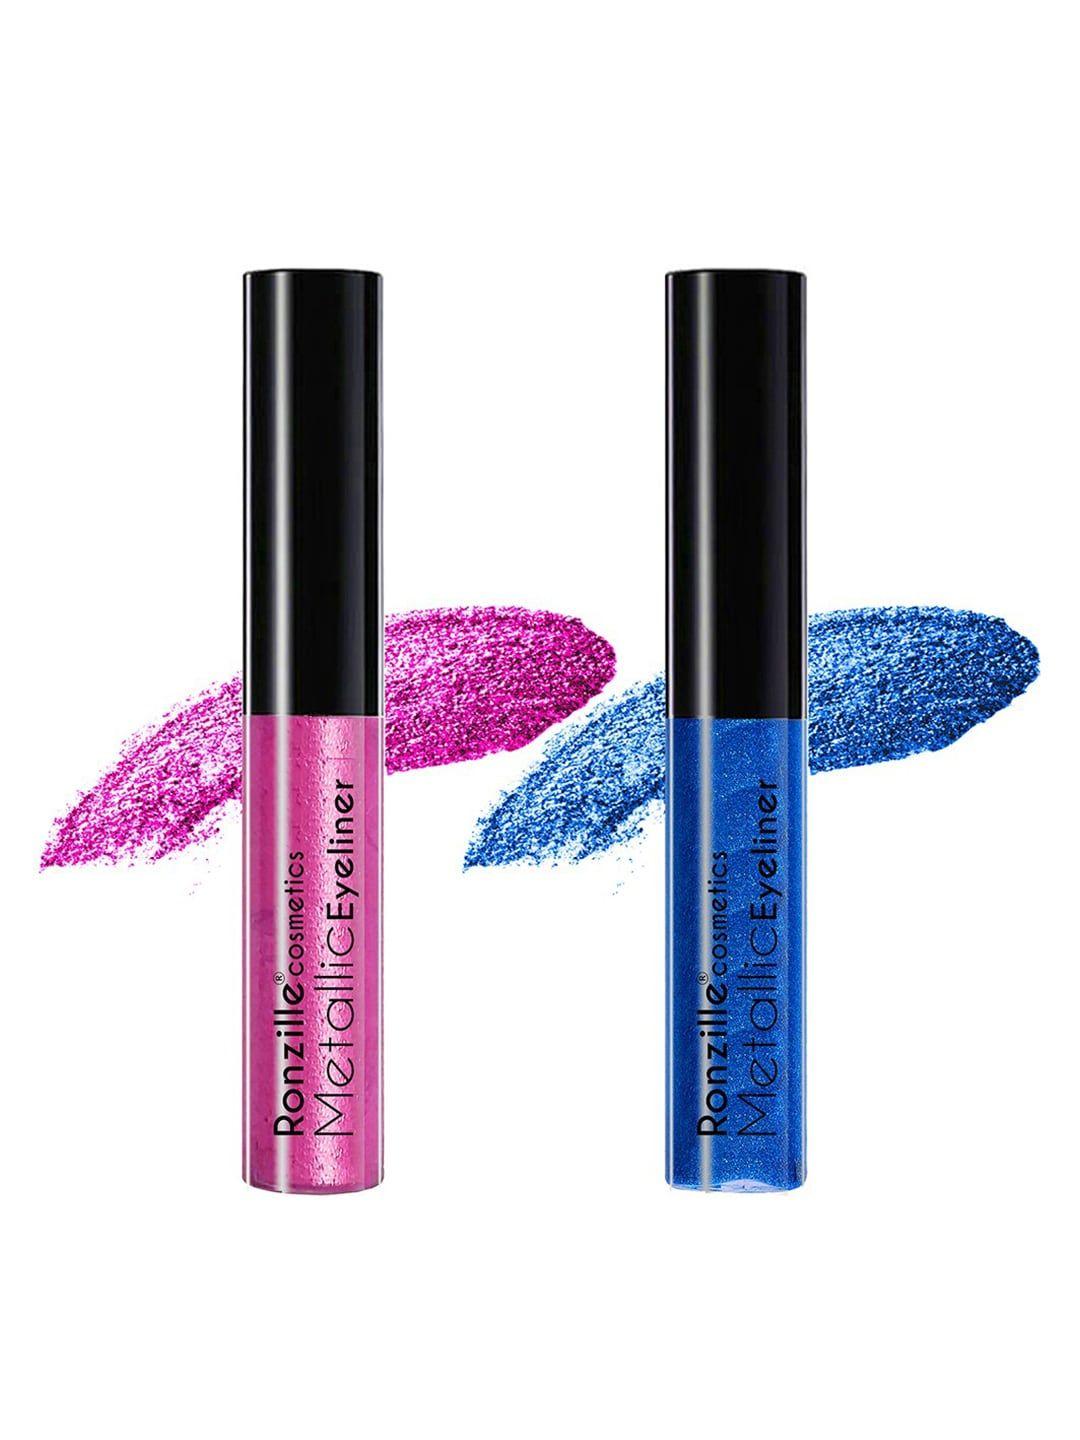 ronzille pack of 2 metallic eyeliners- pink & blue